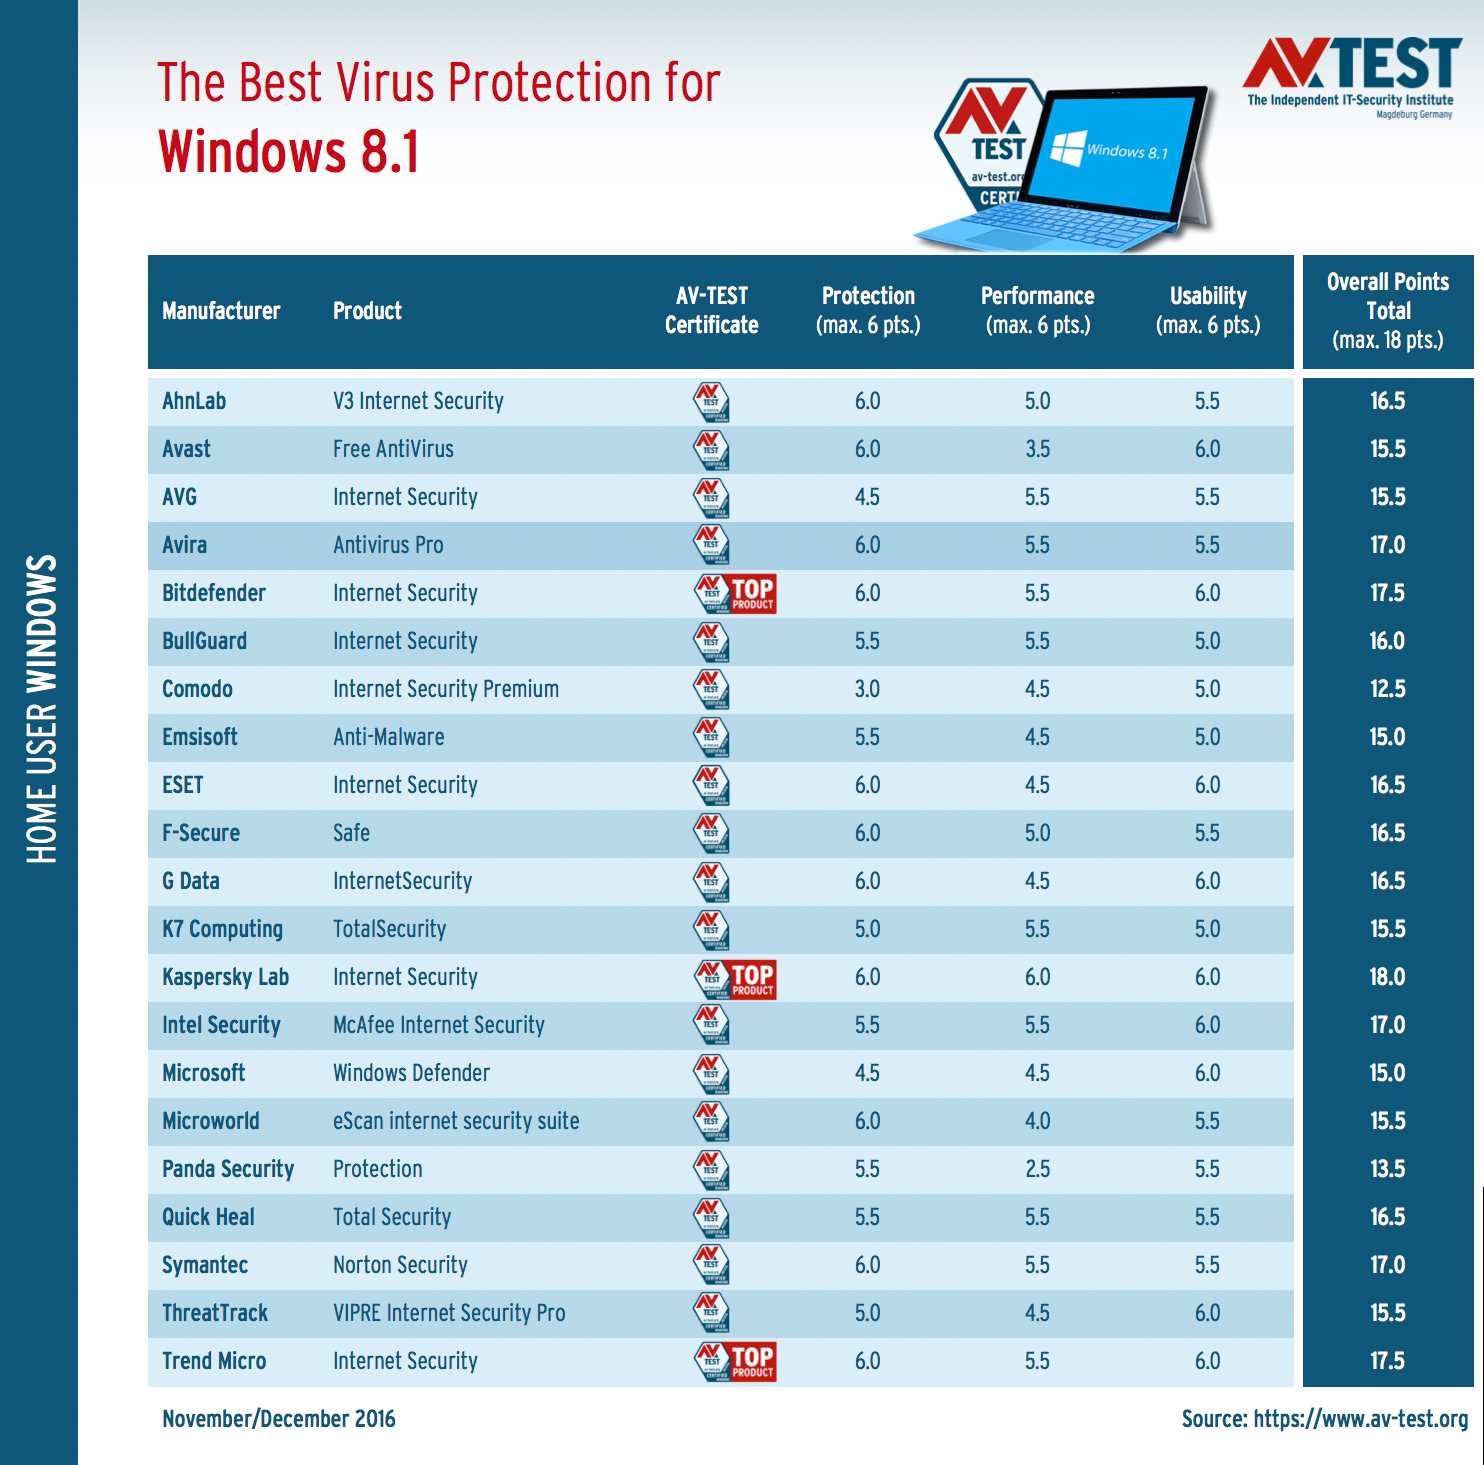 here-are-the-apps-offering-the-best-virus-protection-for-windows-8-1-511950-3.jpg